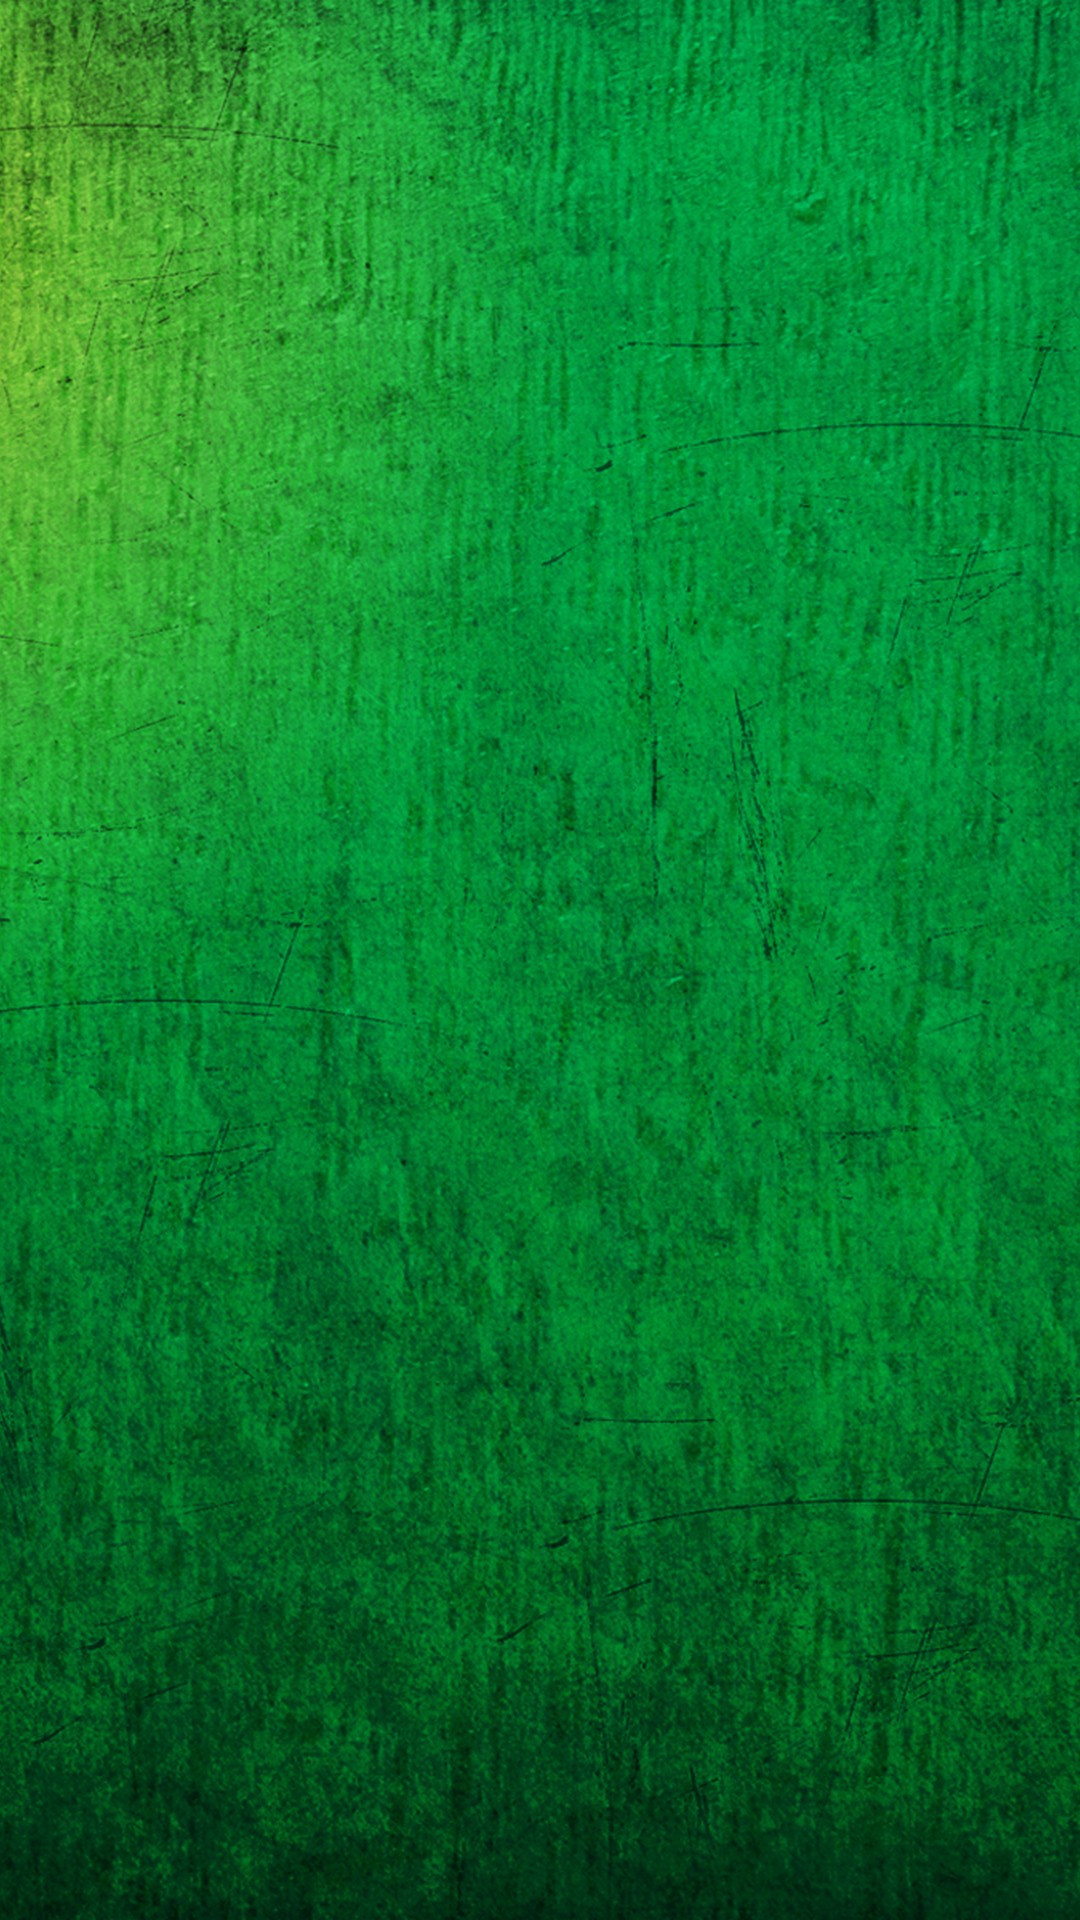 Green Wallpaper For Android with image resolution 1080x1920 pixel. You can make this wallpaper for your Android backgrounds, Tablet, Smartphones Screensavers and Mobile Phone Lock Screen